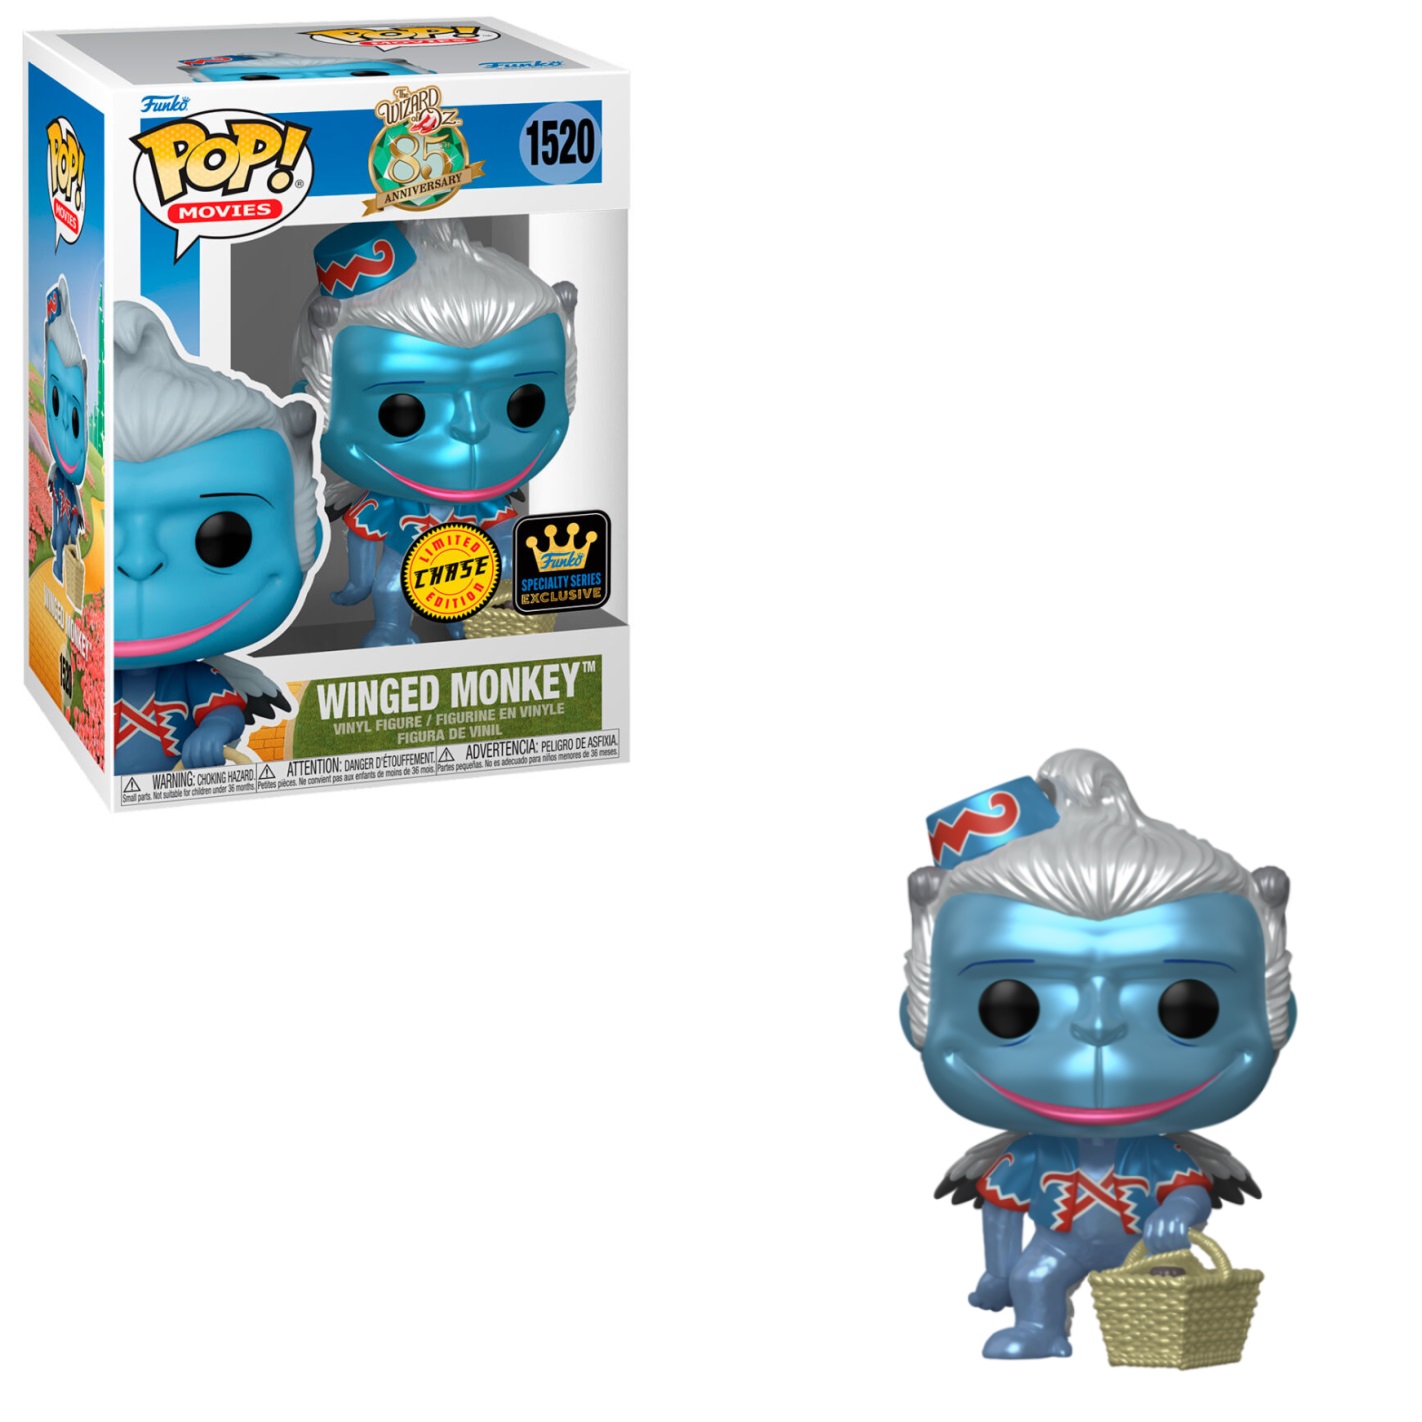 Funko POP! Movies: The Wizard of Oz – Winged Monkey #1520 CHASE Funko Specialty Series Exclusive Vinyl Figure